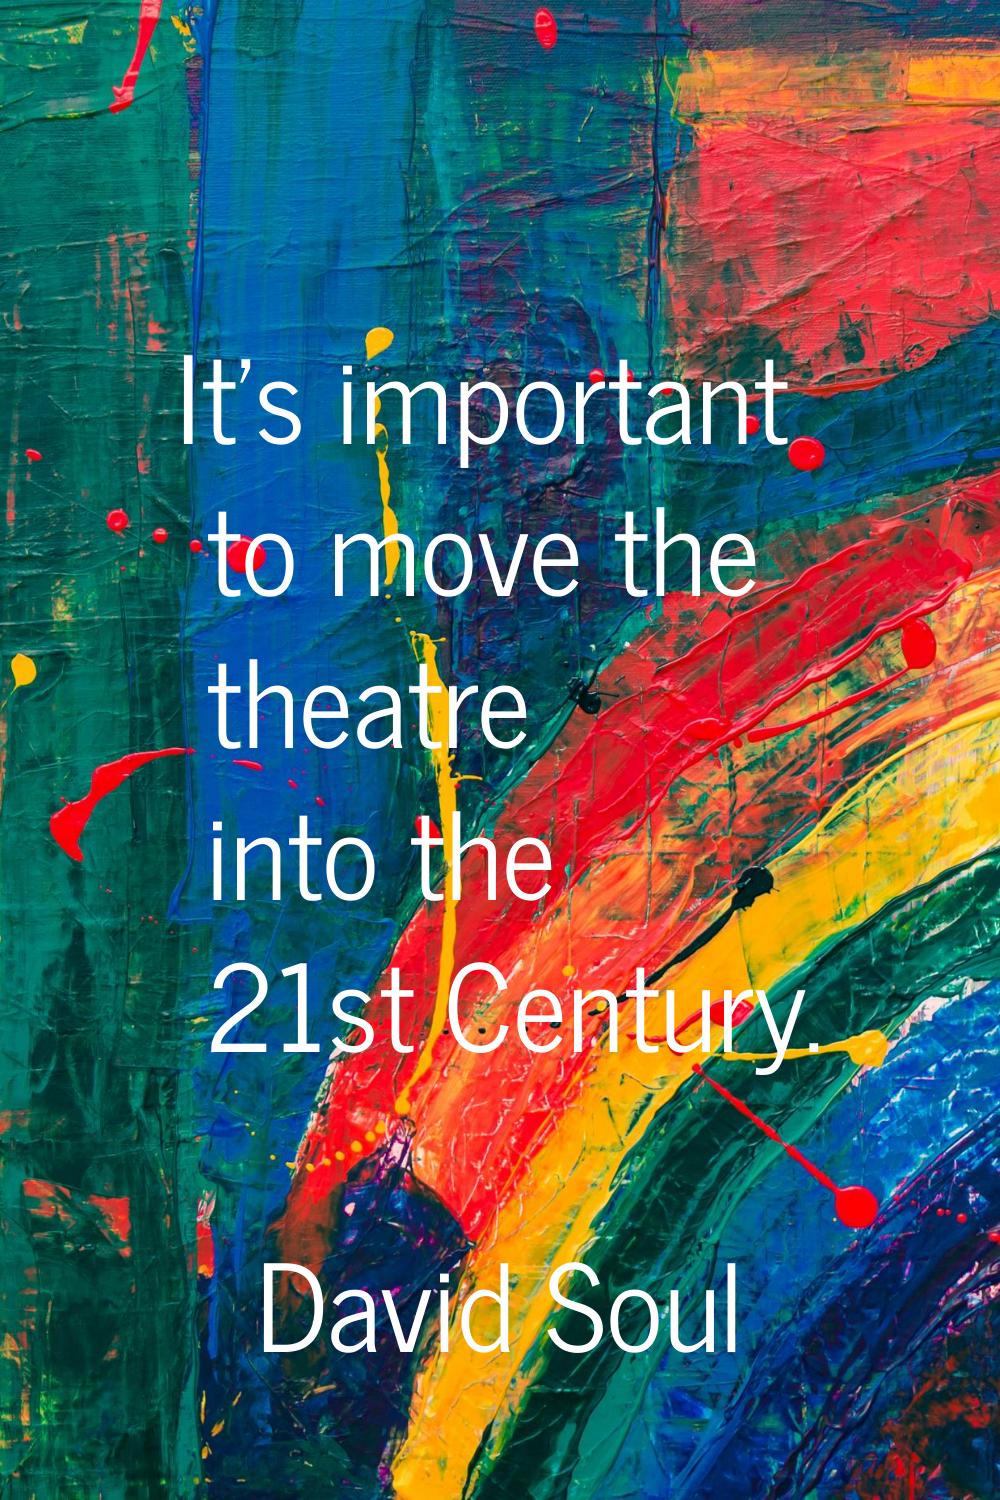 It's important to move the theatre into the 21st Century.